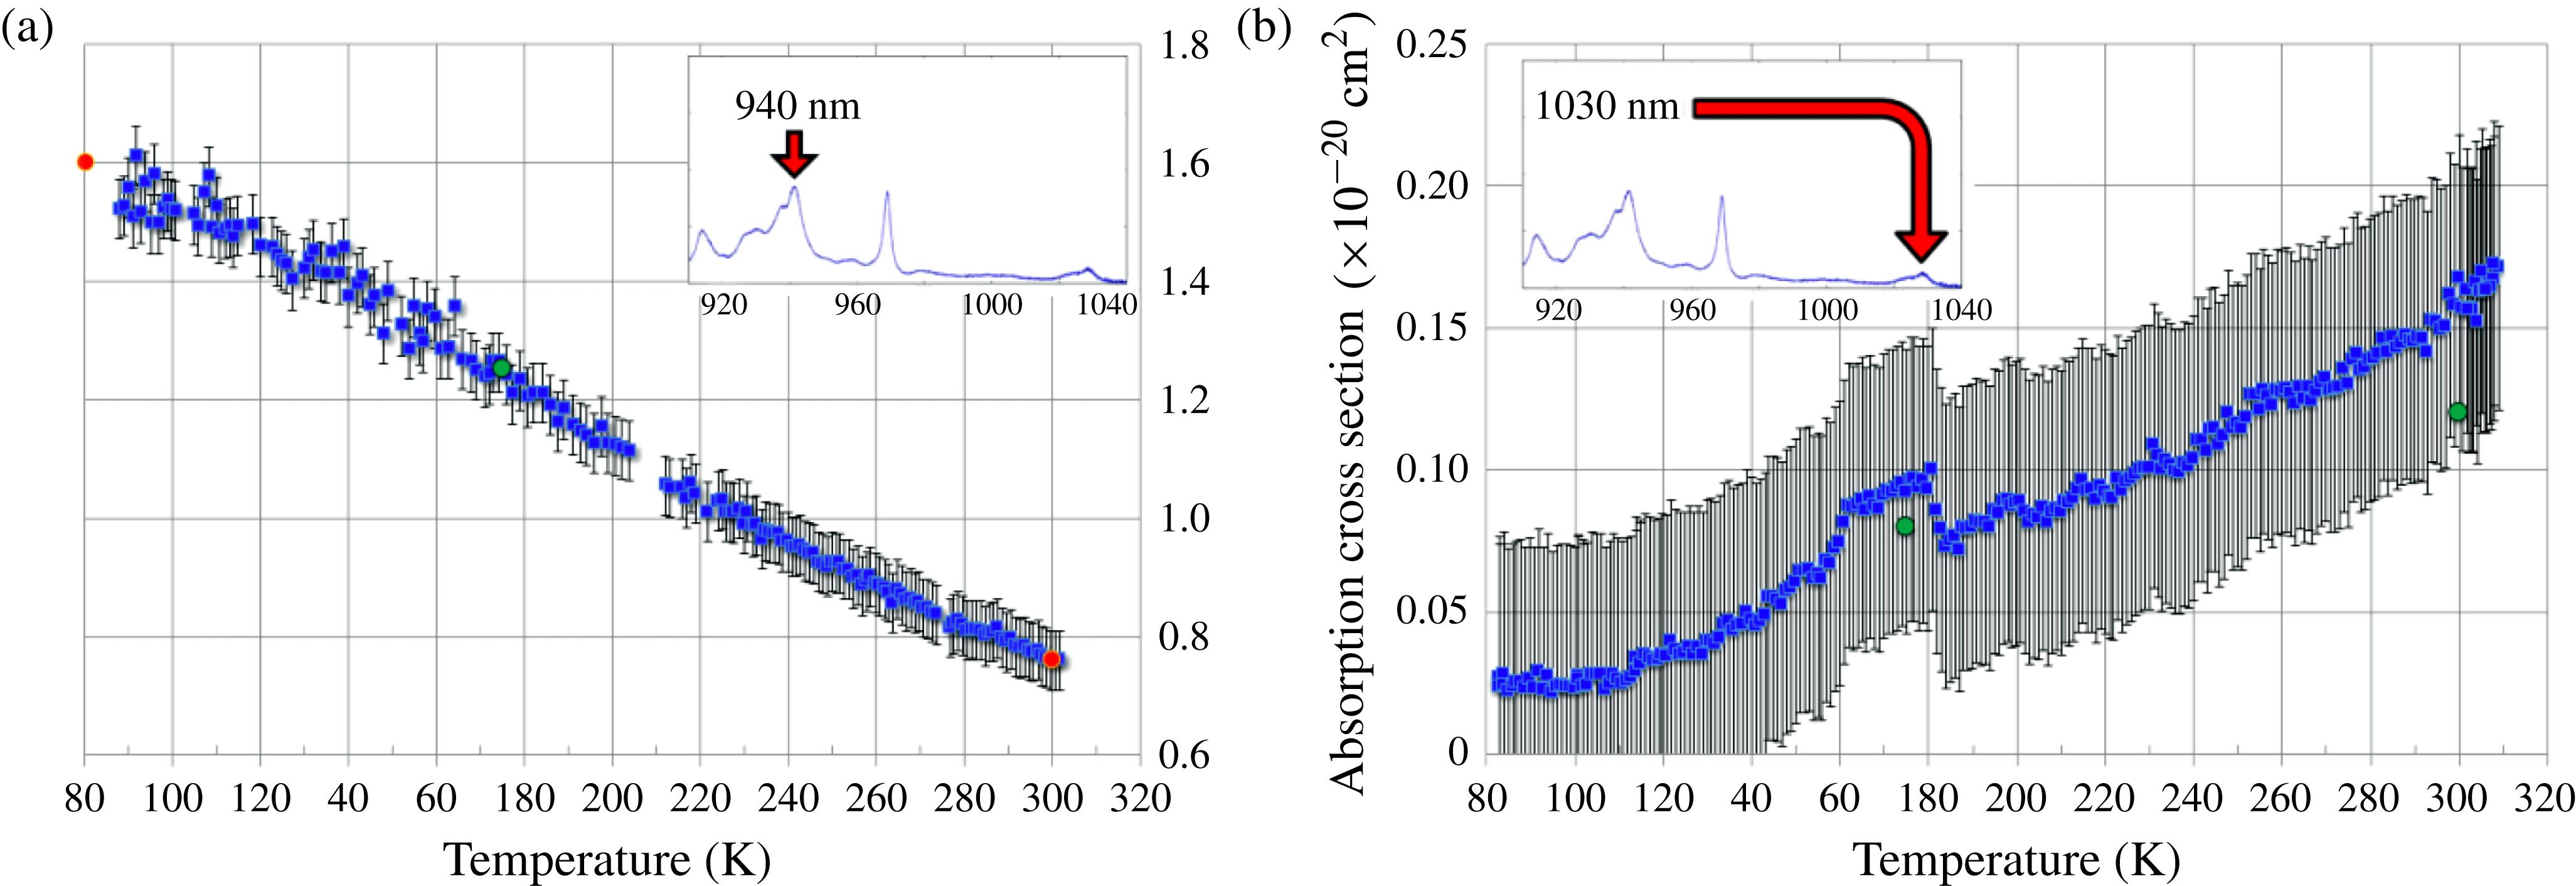 The thermal evolution of the absorption cross section between 90 and 300 K for an HDC grown homogeneously 1 at.% doped 1 cm thick Yb:YAG crystal. The data in (a) are collected at 940 nm whereas those in (b) correspond to the 1030 nm absorption peak. The red dots refer to data from Fan[7] whereas the green ones refer to data from Brown[8].